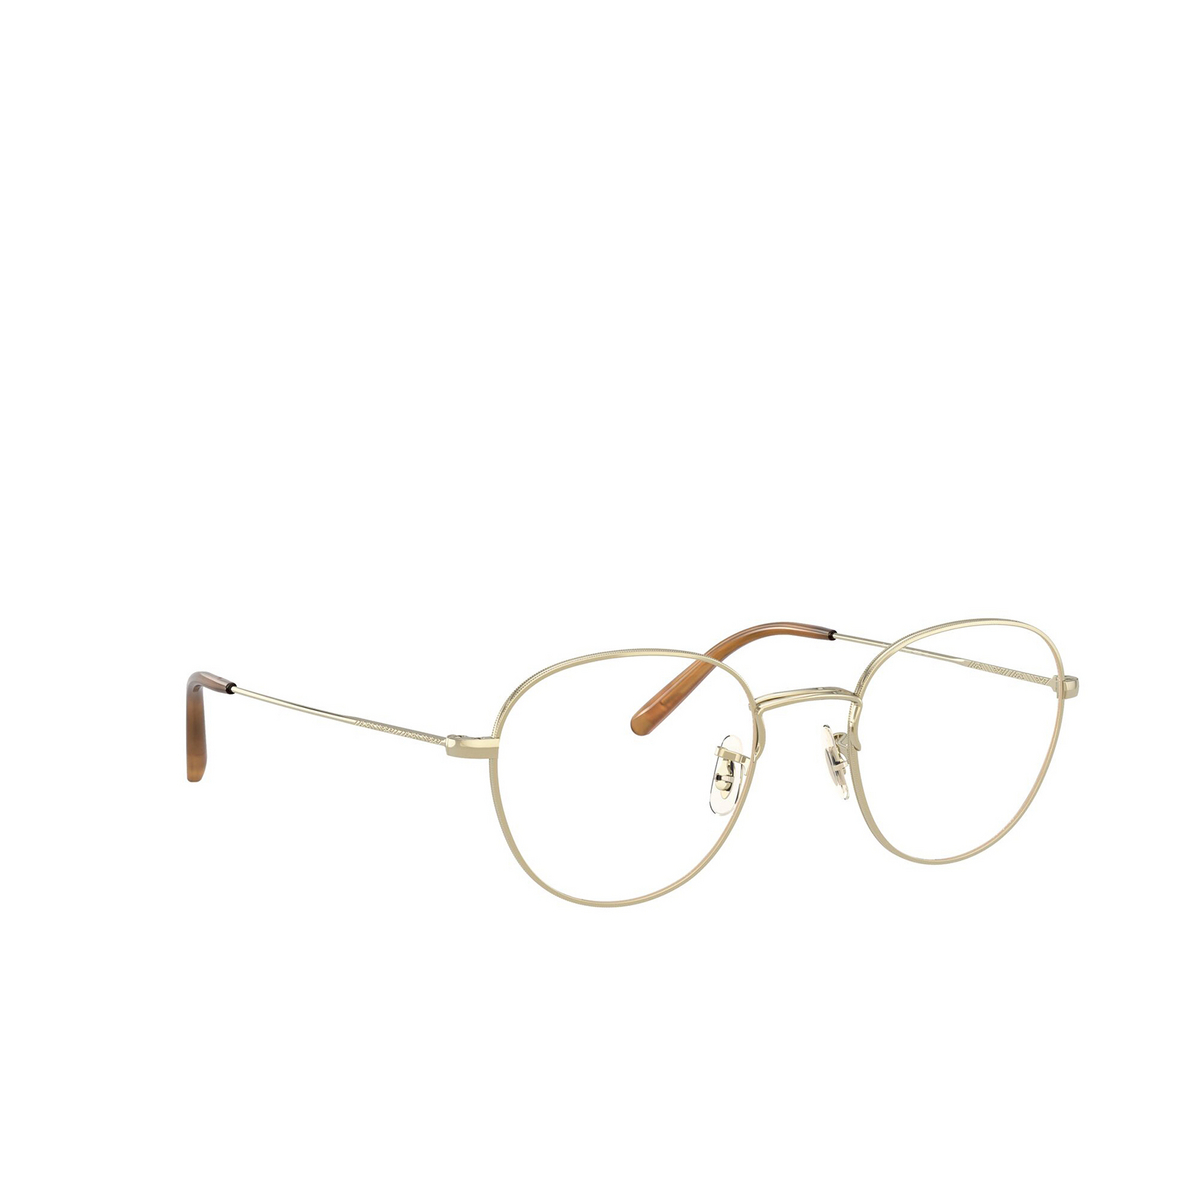 Oliver Peoples® Round Eyeglasses: Piercy OV1281 color Gold 5145 - three-quarters view.